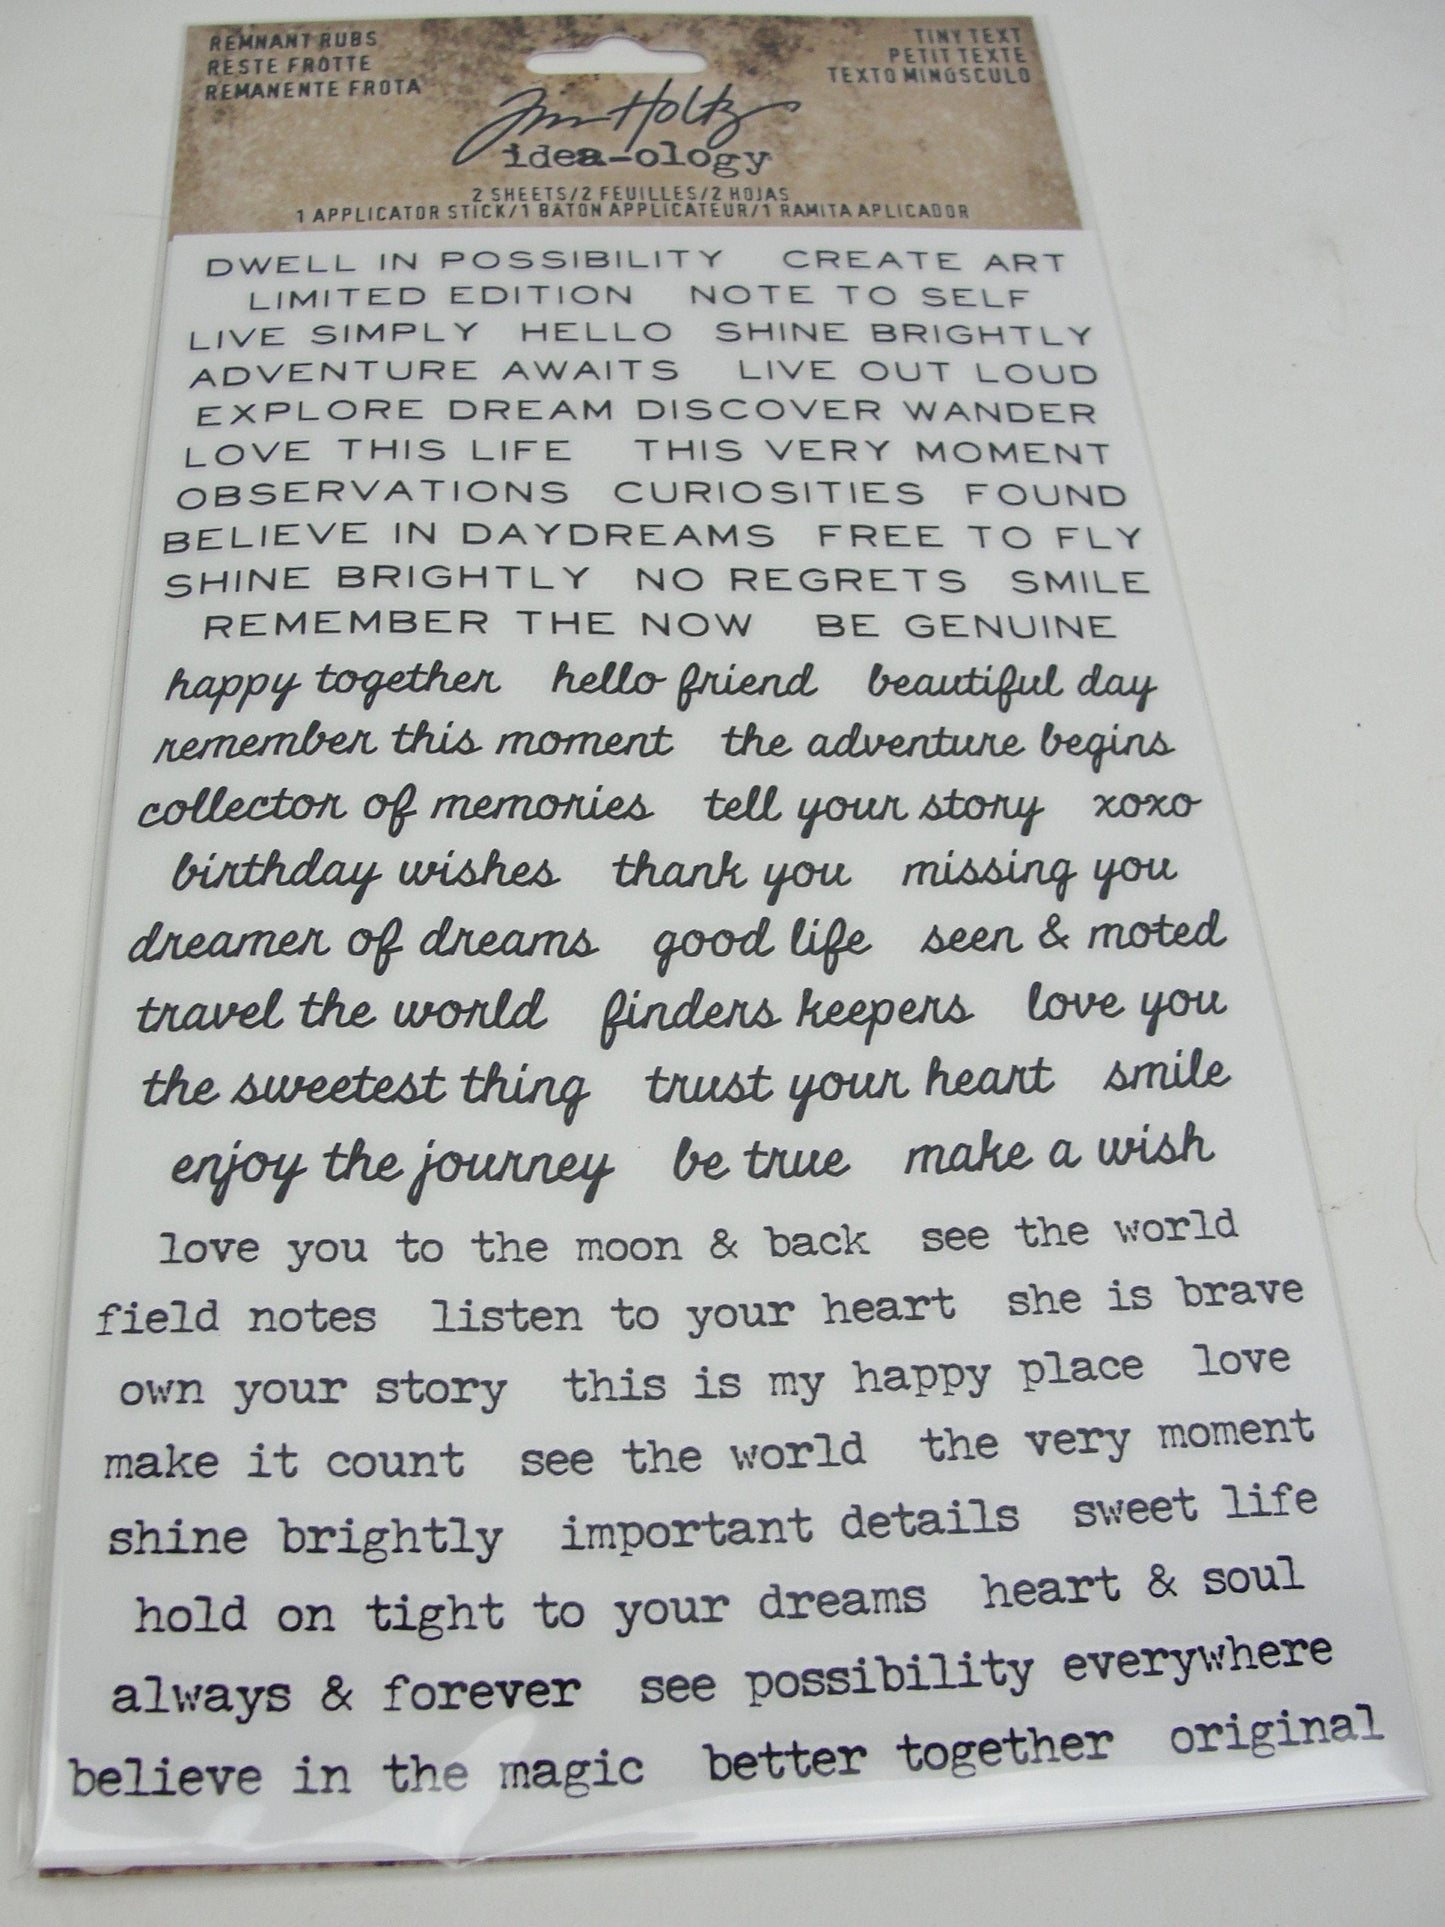 Tim Holtz Rub-ons choose Tiny Text, Gilded Accents, Specimen, Halloween, Eccentric or Christmas